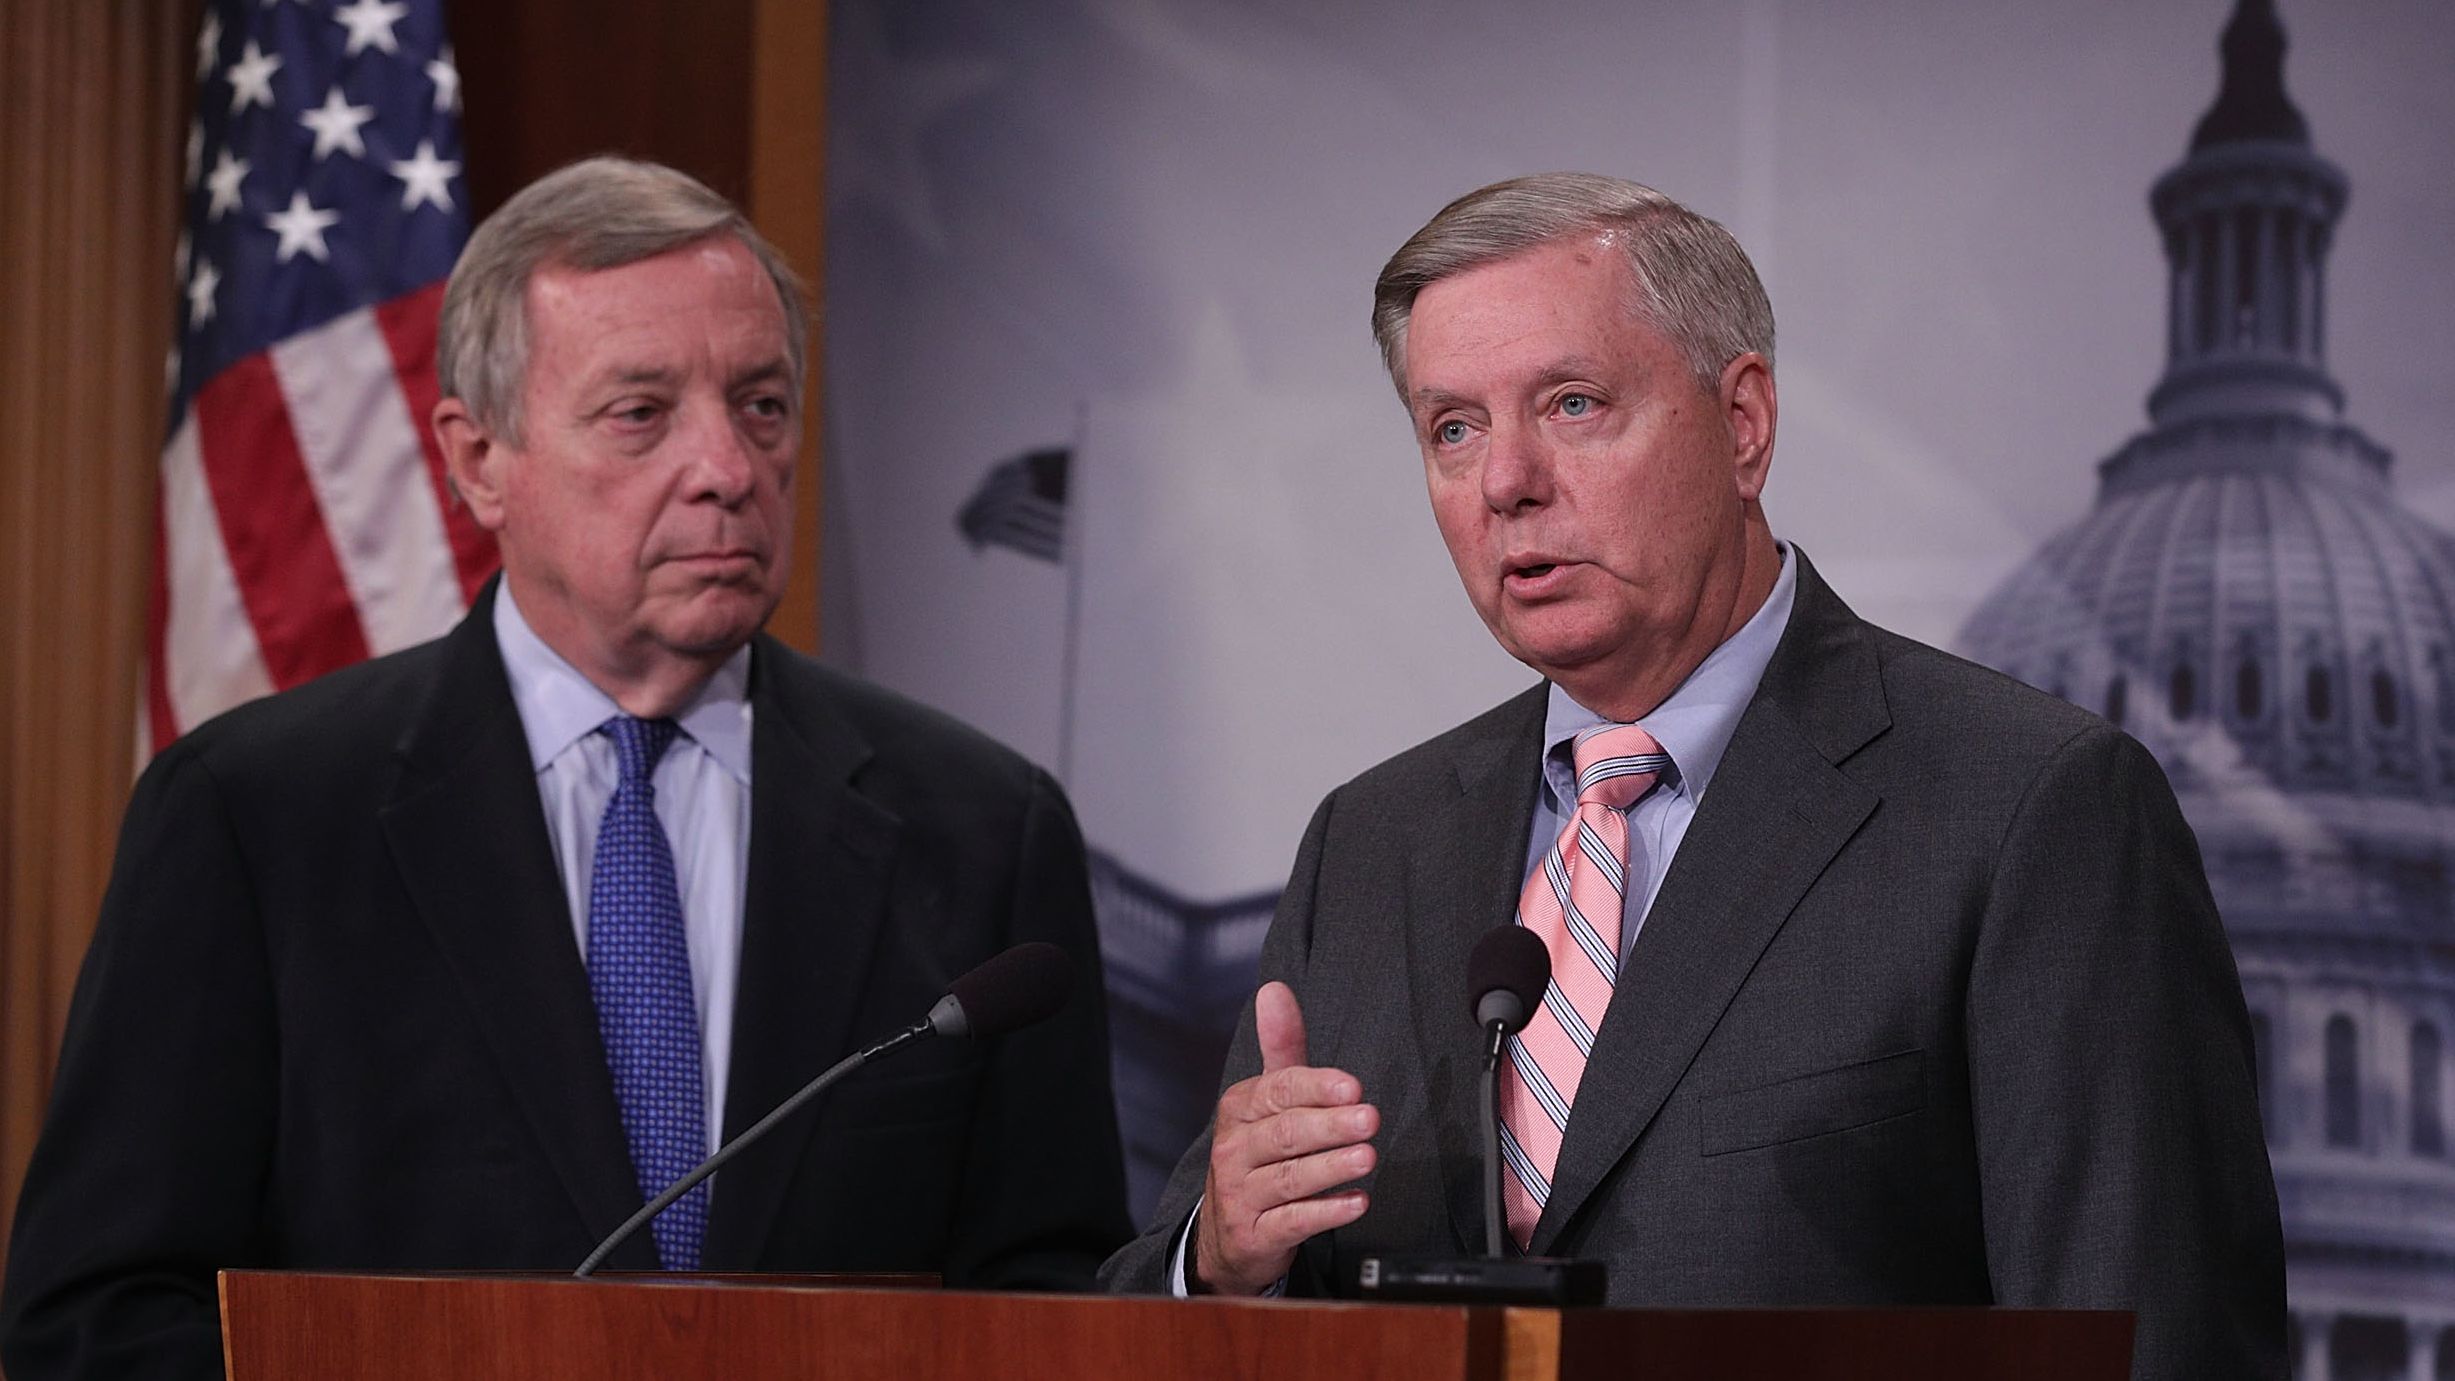 Sens. Dick Durbin, D-Illinois, and Lindsey Graham, R-South Carolina, speak during a news conference at the US Capitol September 5, 2017 in Washington.